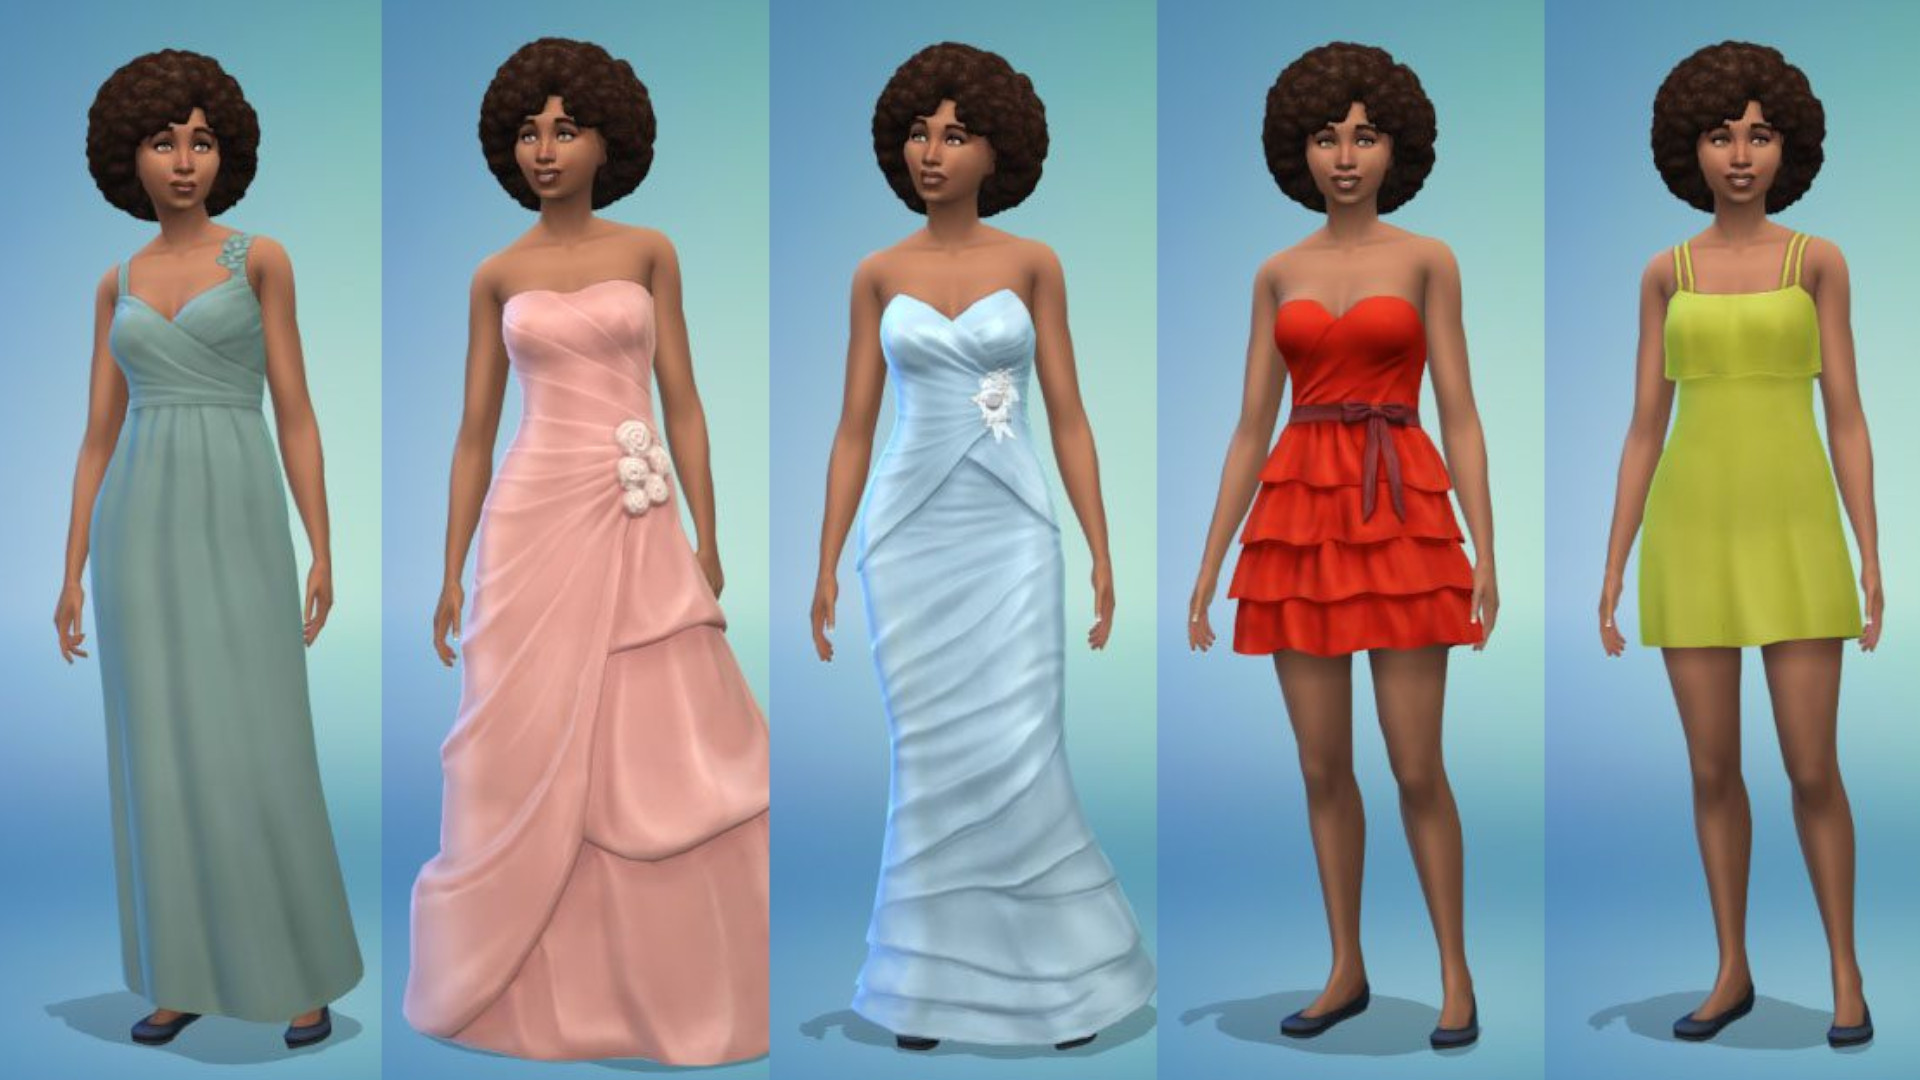 Sims 4 gets a new lot type and CAS items in a free update